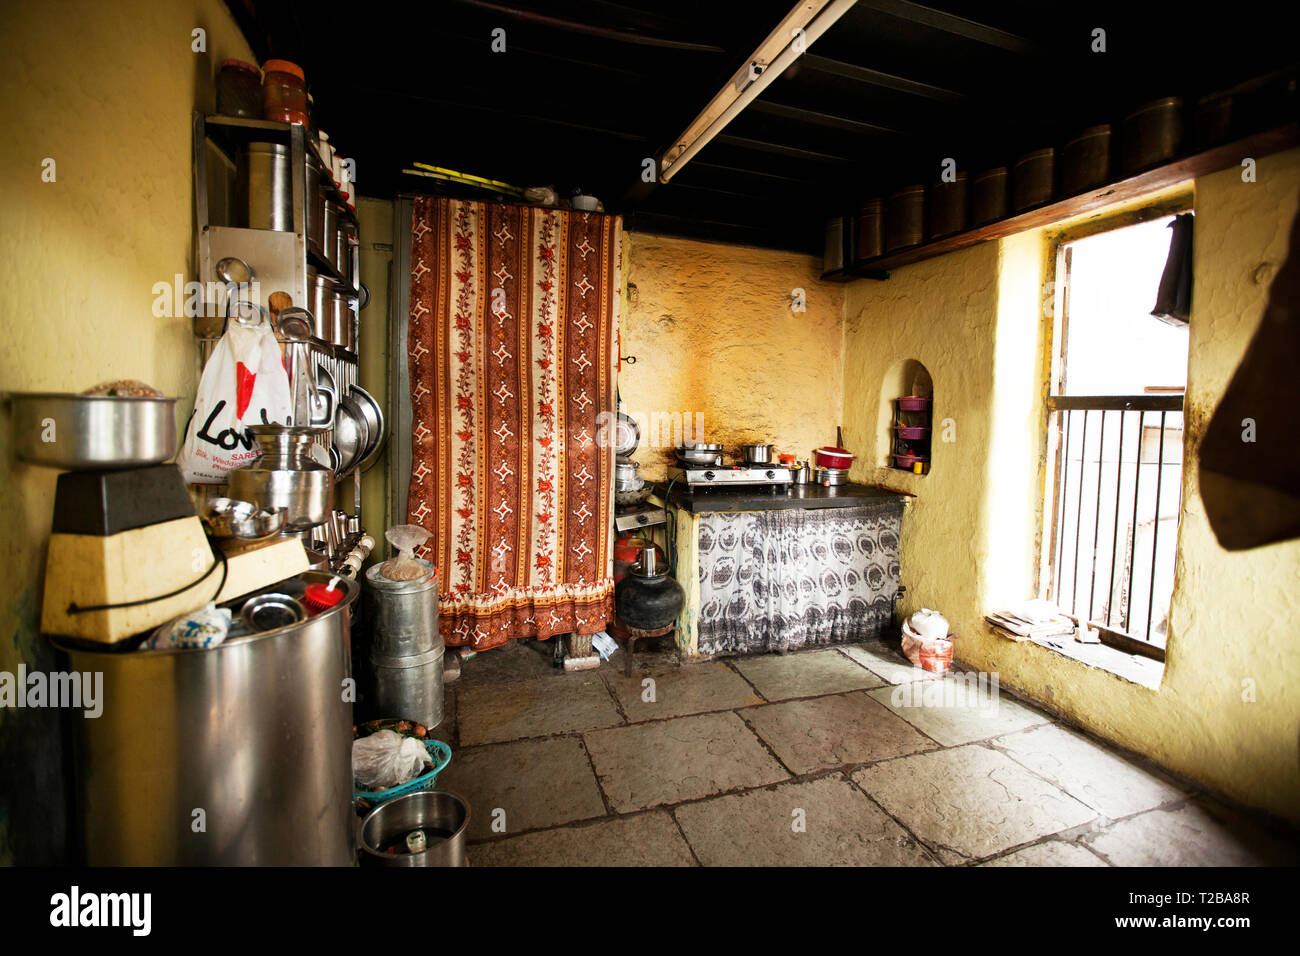 Kitchen Interior At Old Building In Wadas Of Pune India